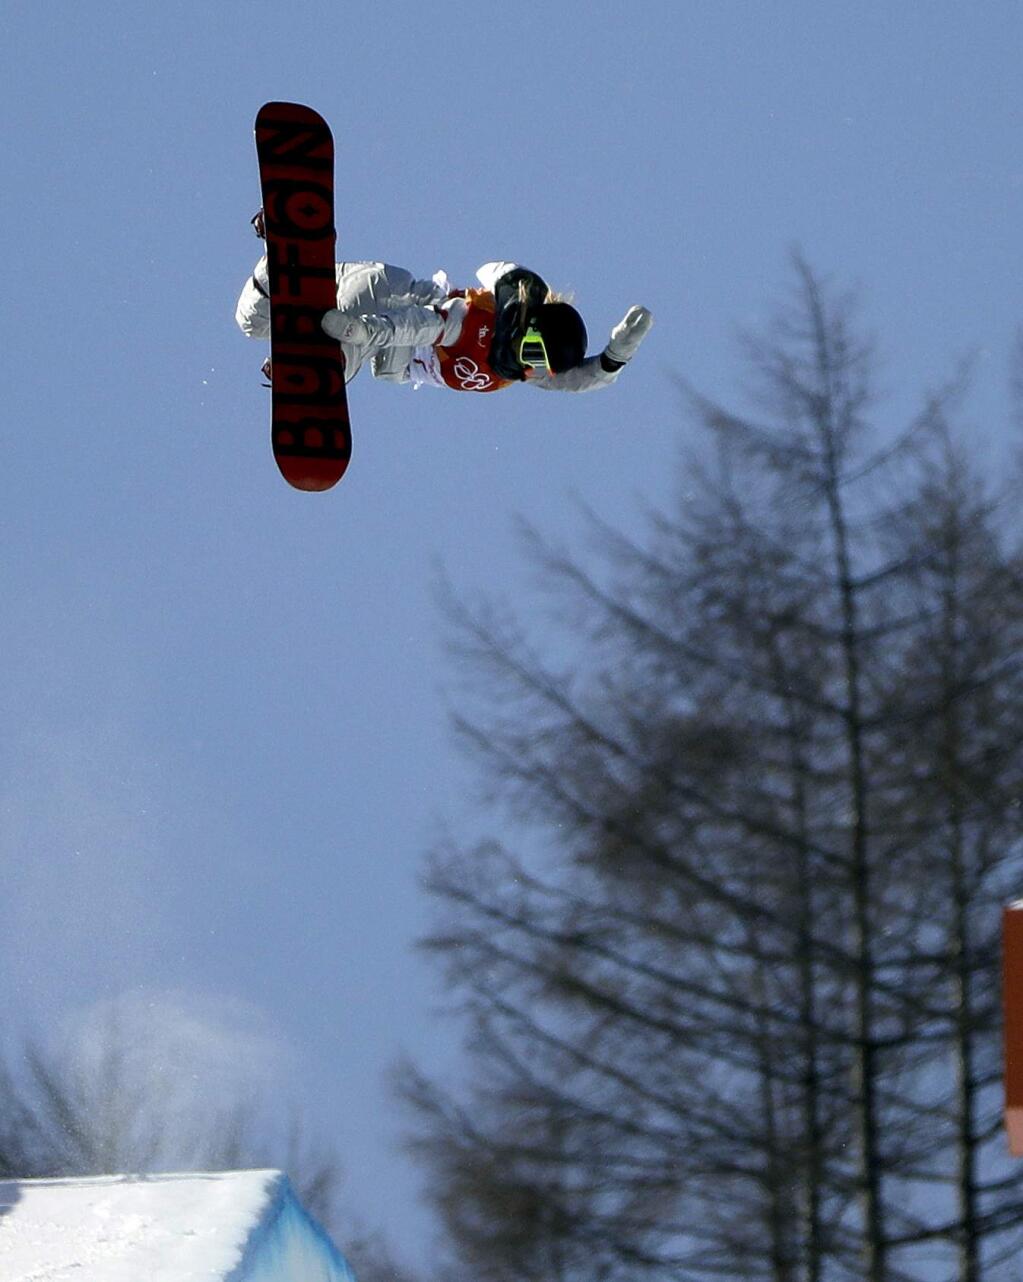 Chloe Kim, of the United States, jumps during the women's halfpipe finals at Phoenix Snow Park at the 2018 Winter Olympics in Pyeongchang, South Korea, Tuesday, Feb. 13, 2018. (AP Photo/Gregory Bull)